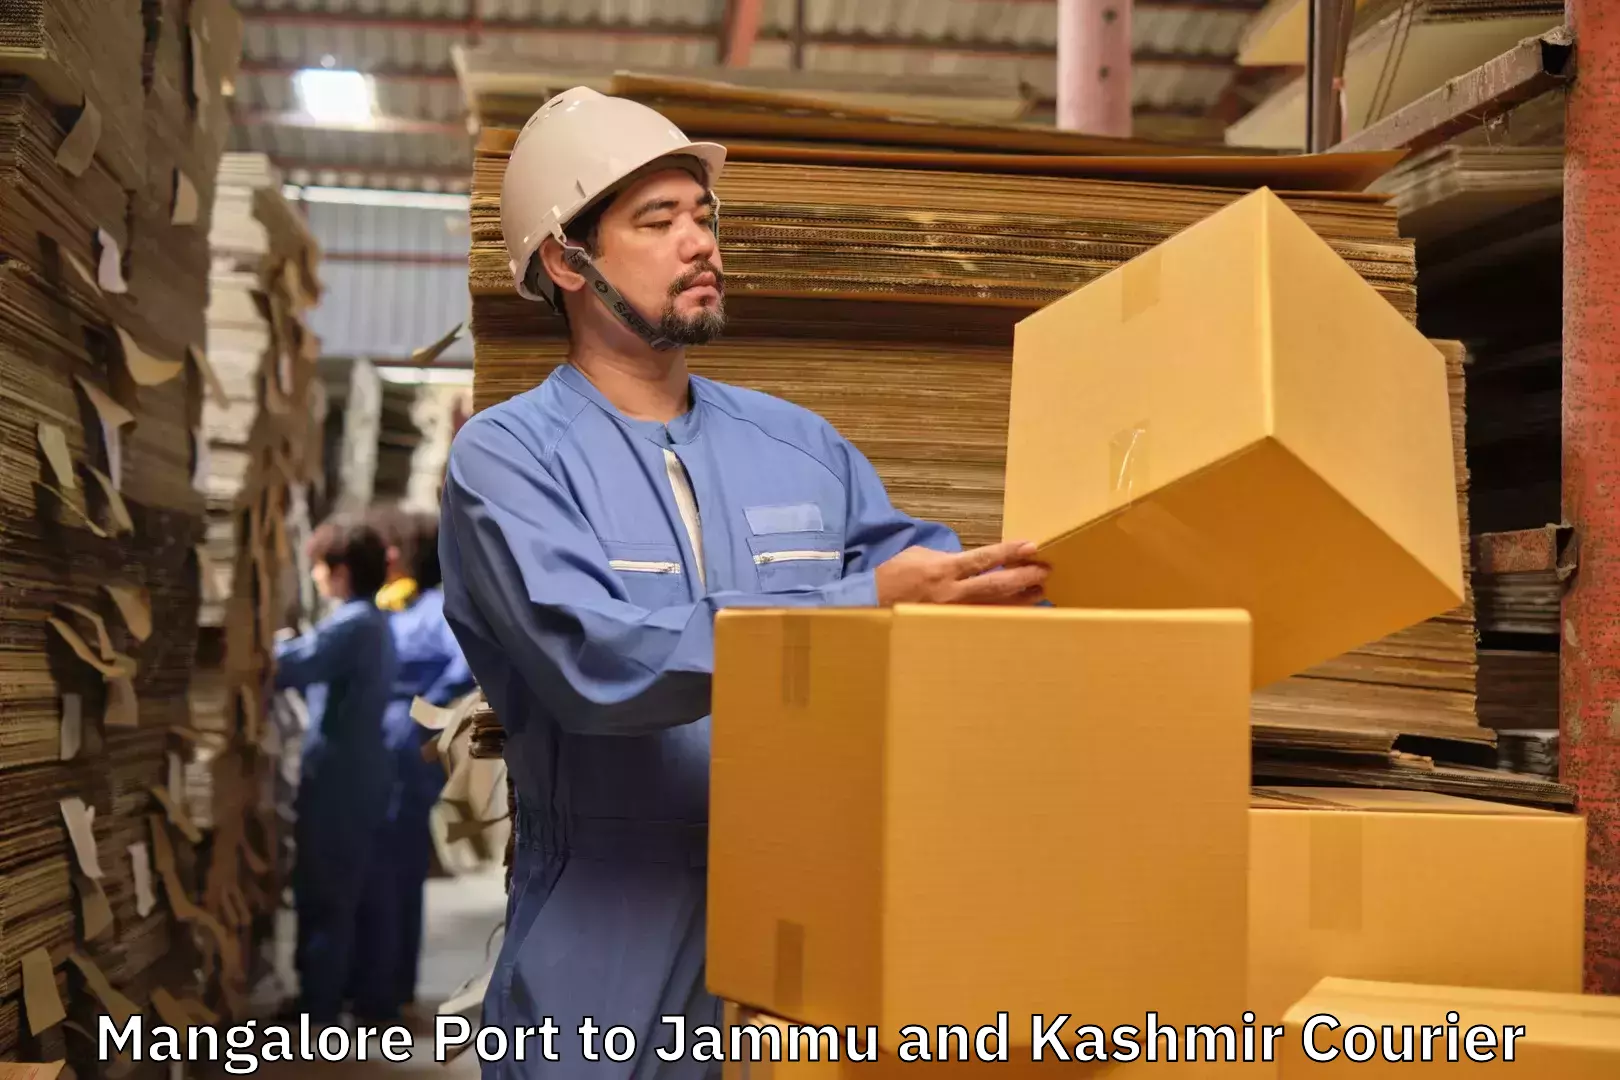 Luggage transport consulting Mangalore Port to Jammu and Kashmir